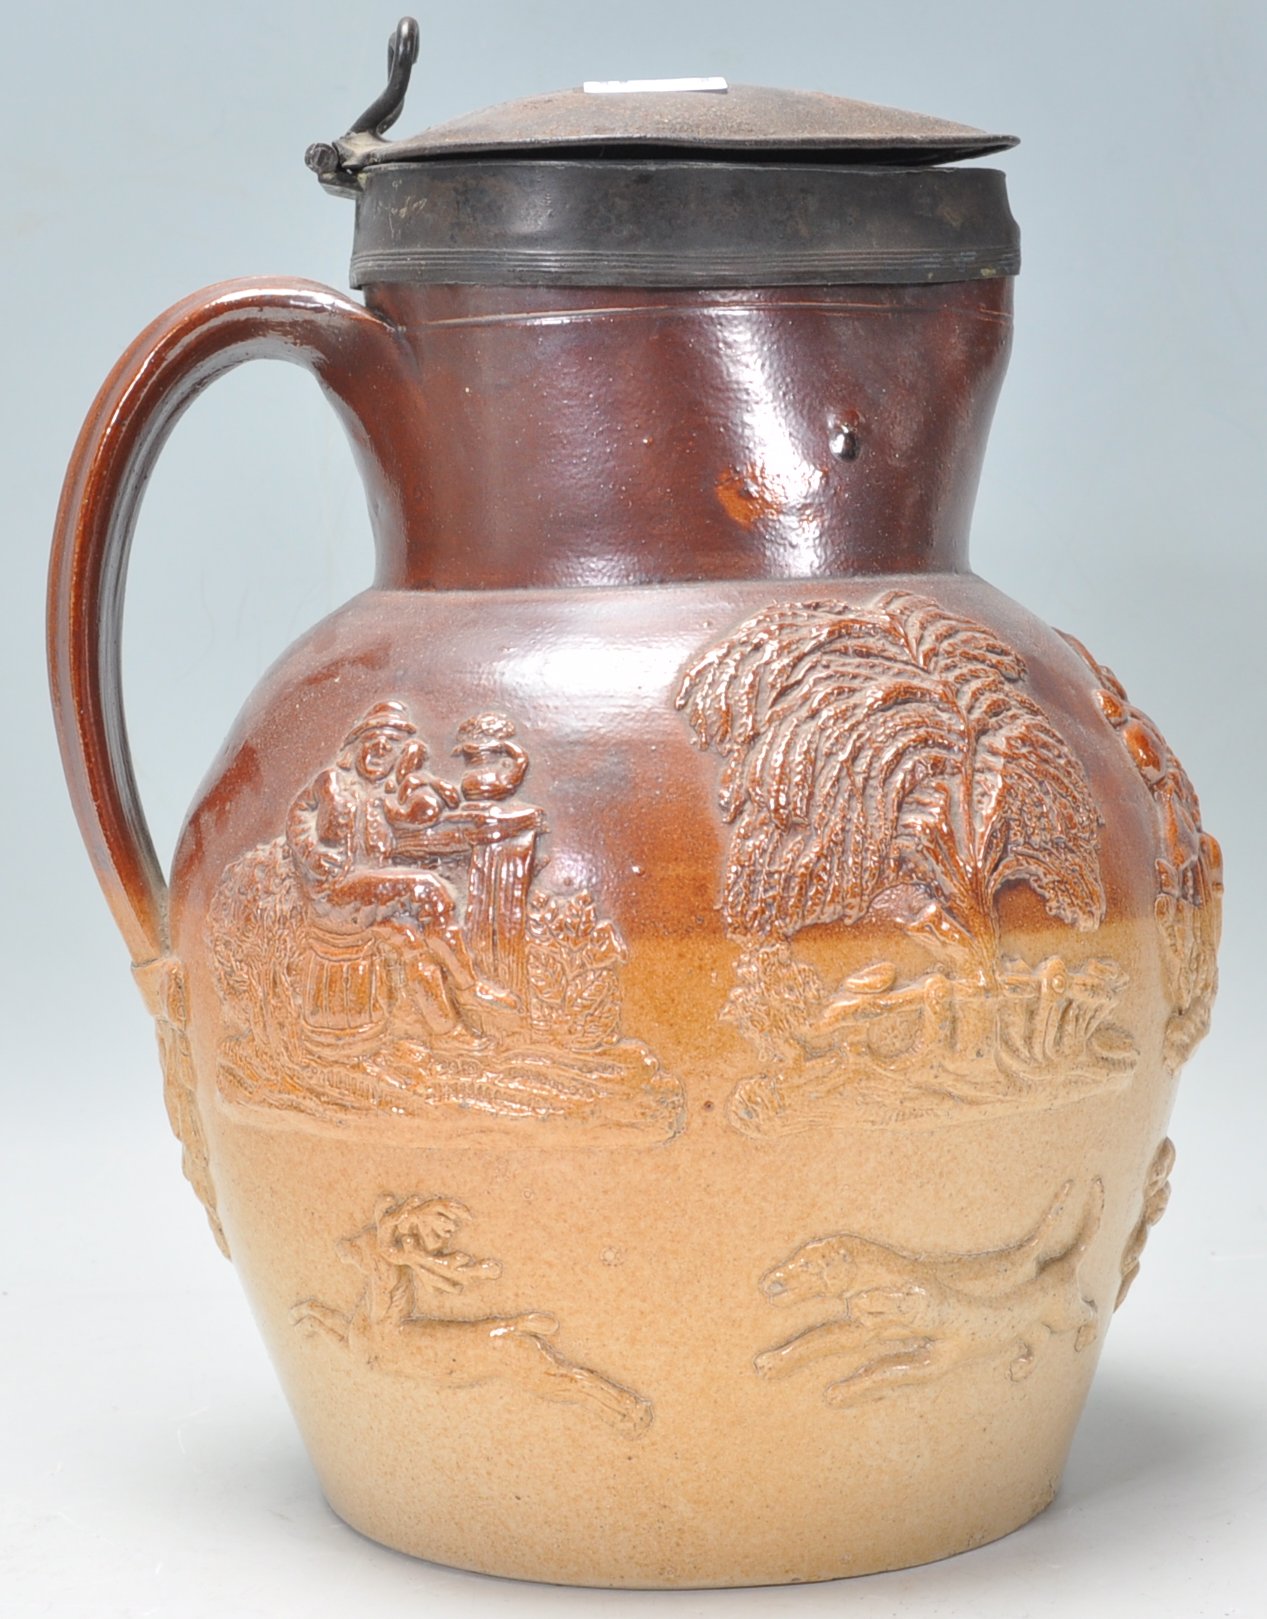 Vauxhall Pottery - An early 19th Century London Sa - Image 3 of 7